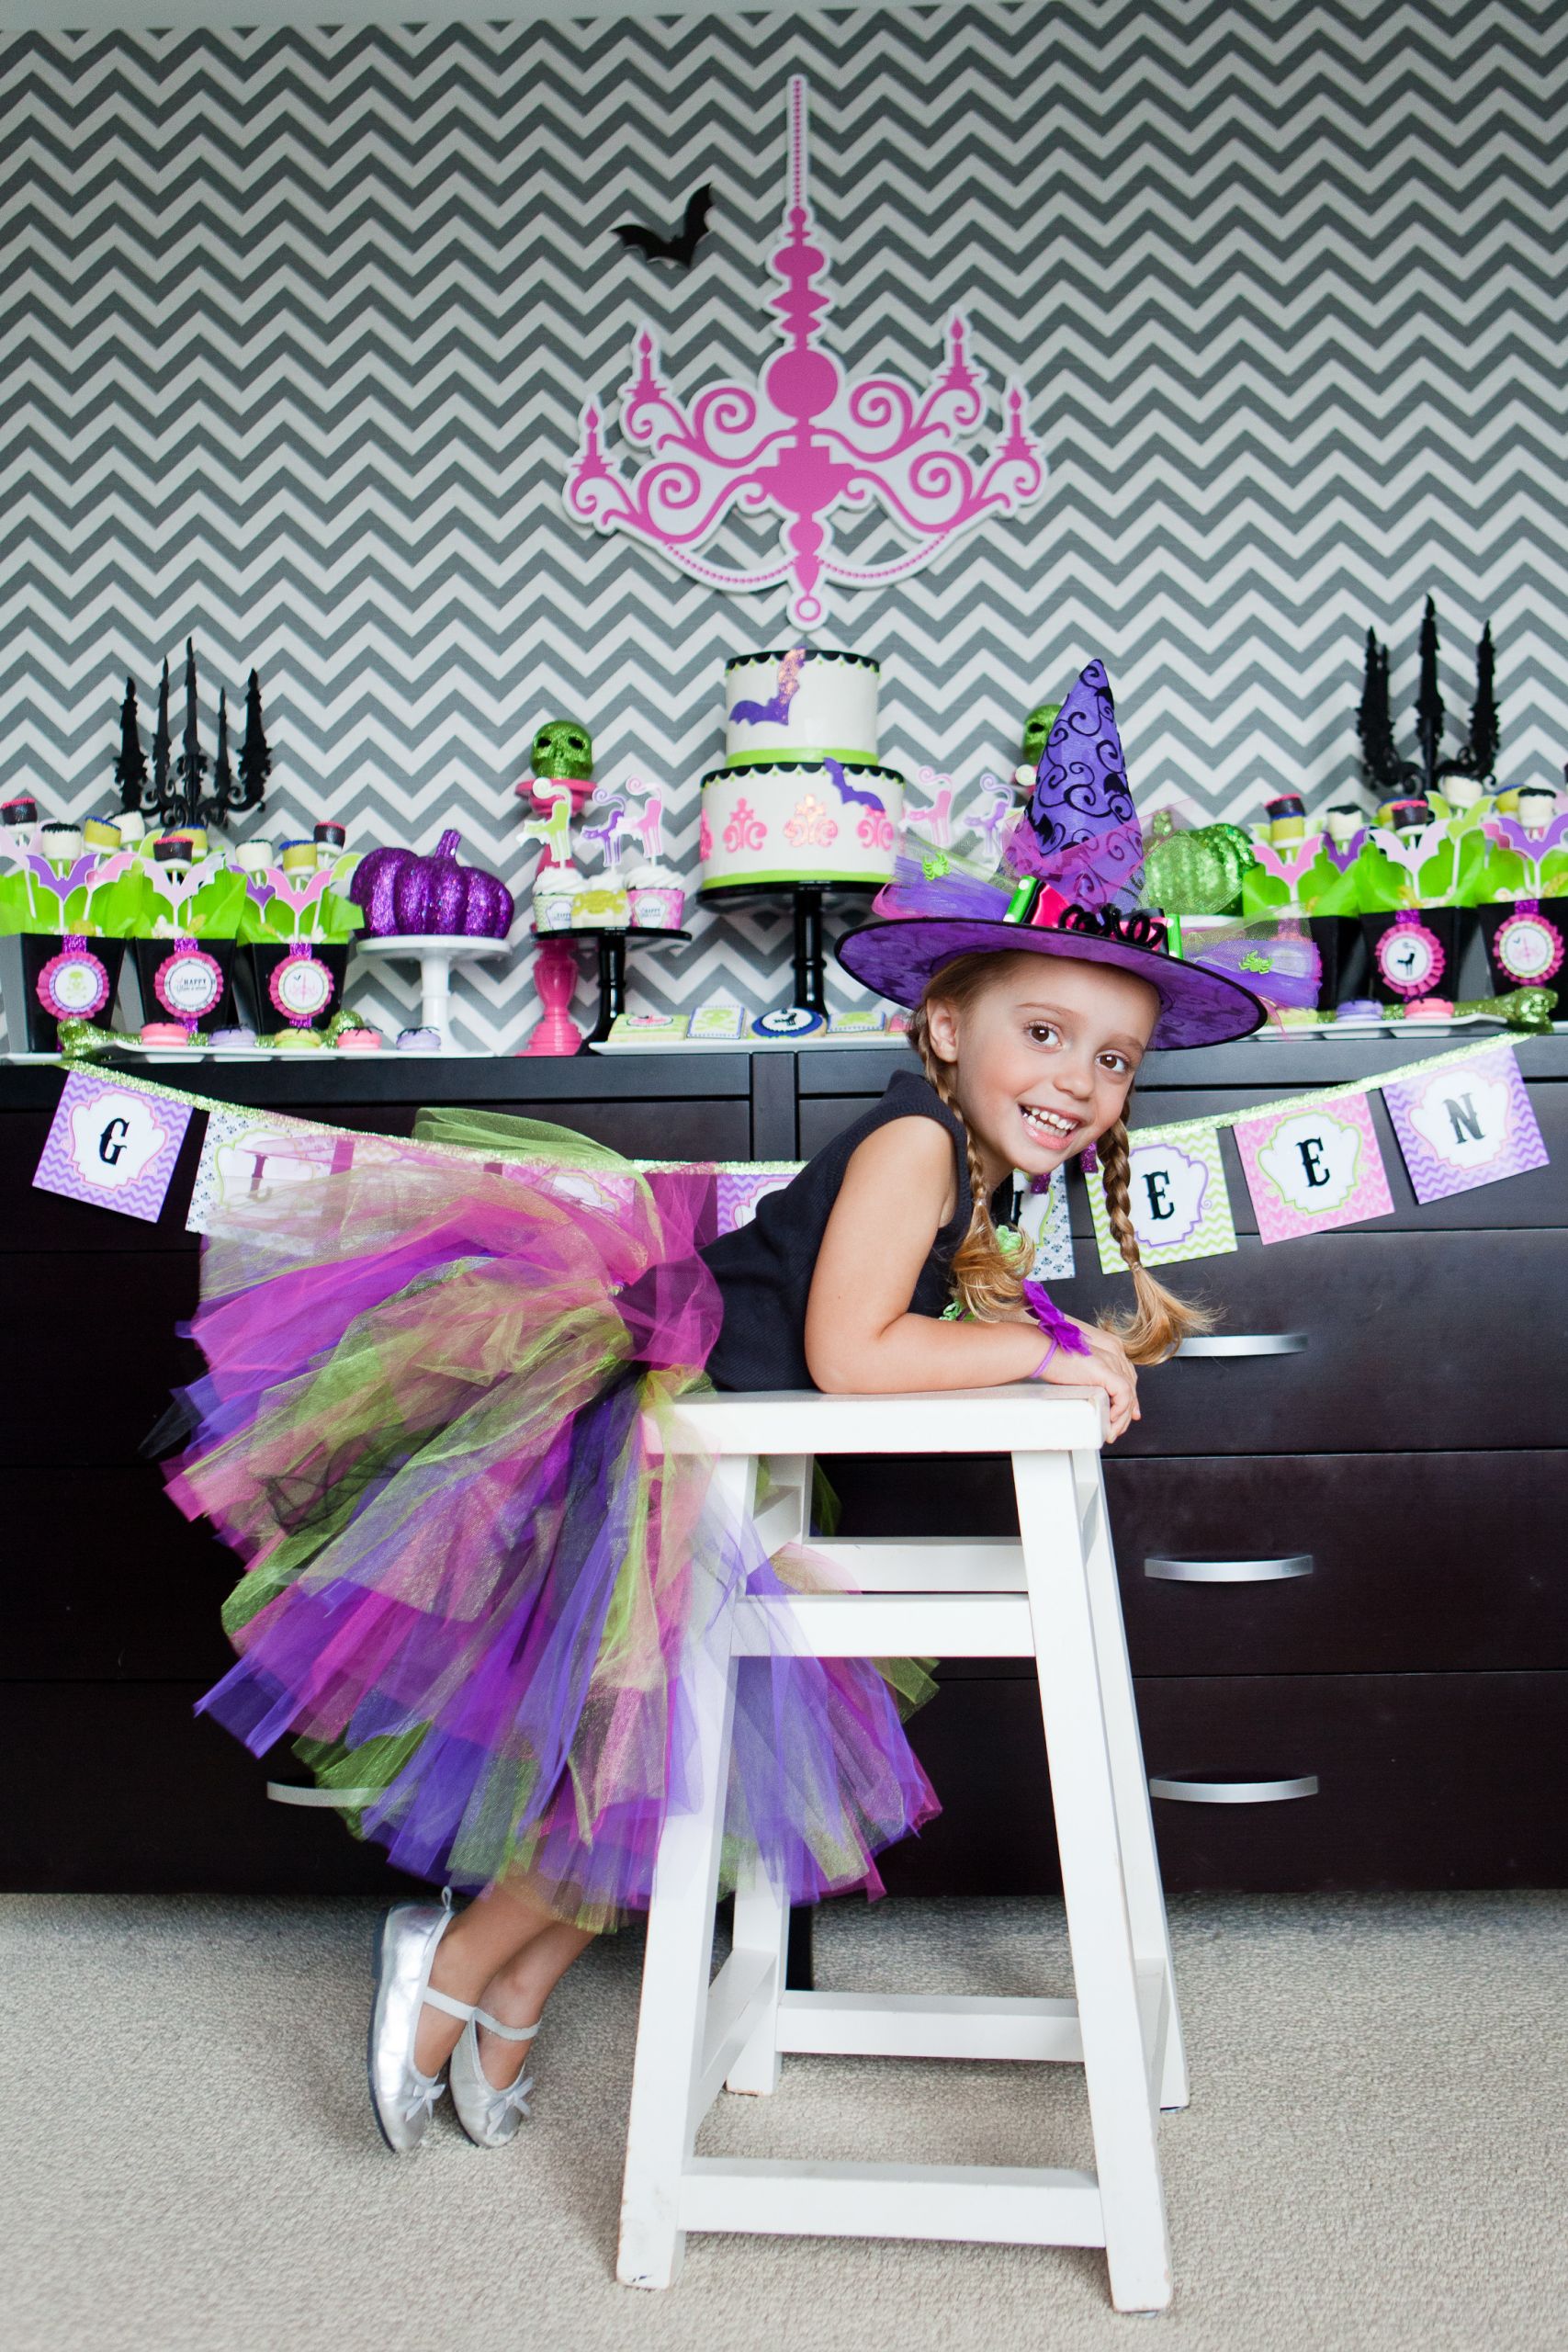 Halloween Party Ideas For Girls
 Our NEW GLAM O WEEN Halloween Party Printable Collection